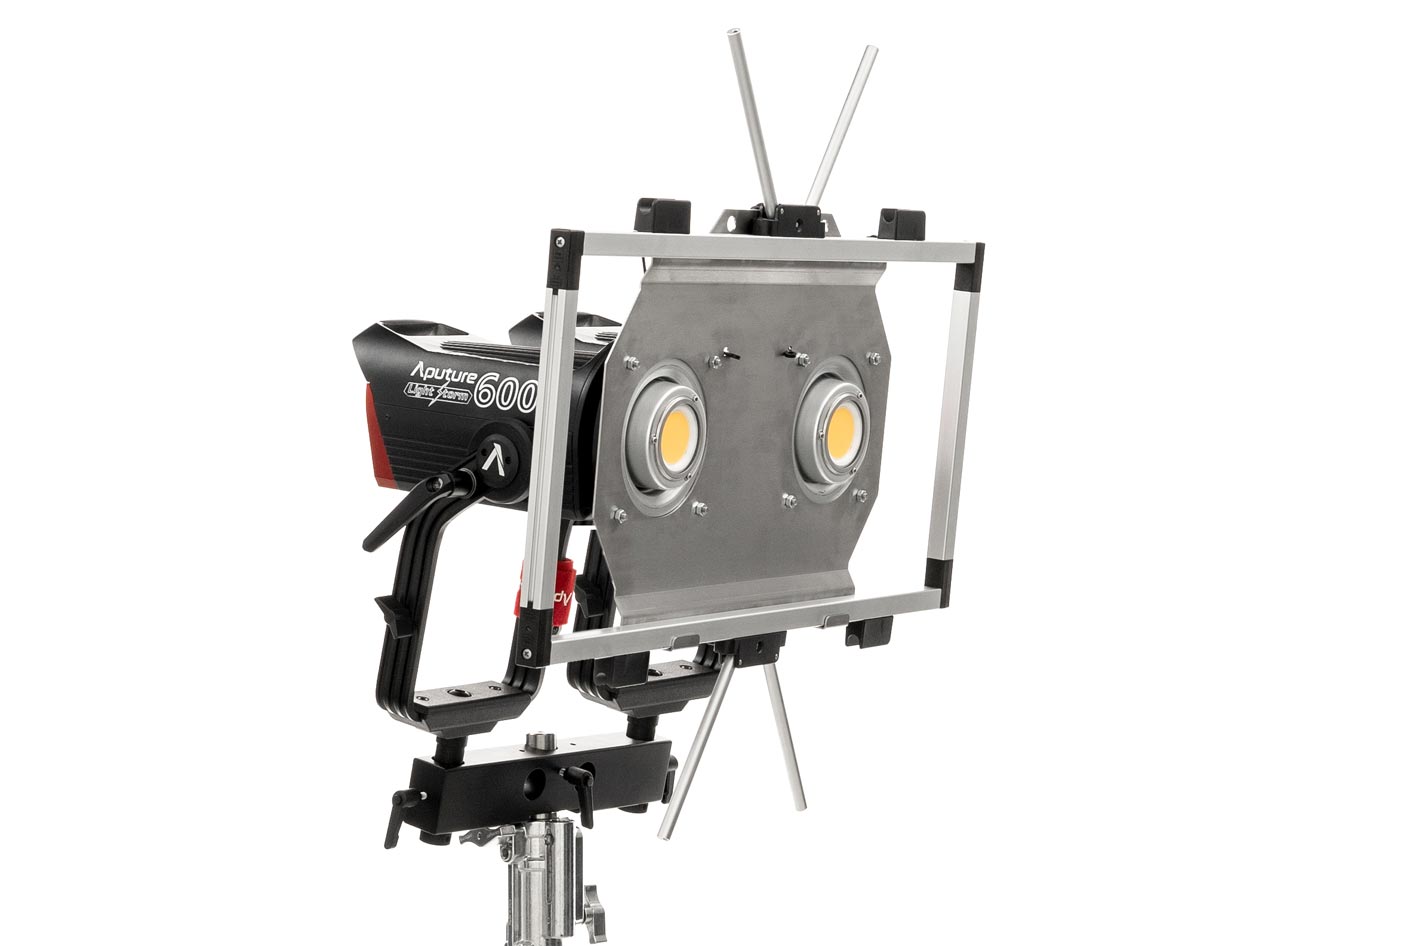 DoPchoice’s new light direction tools for Aputure 600D